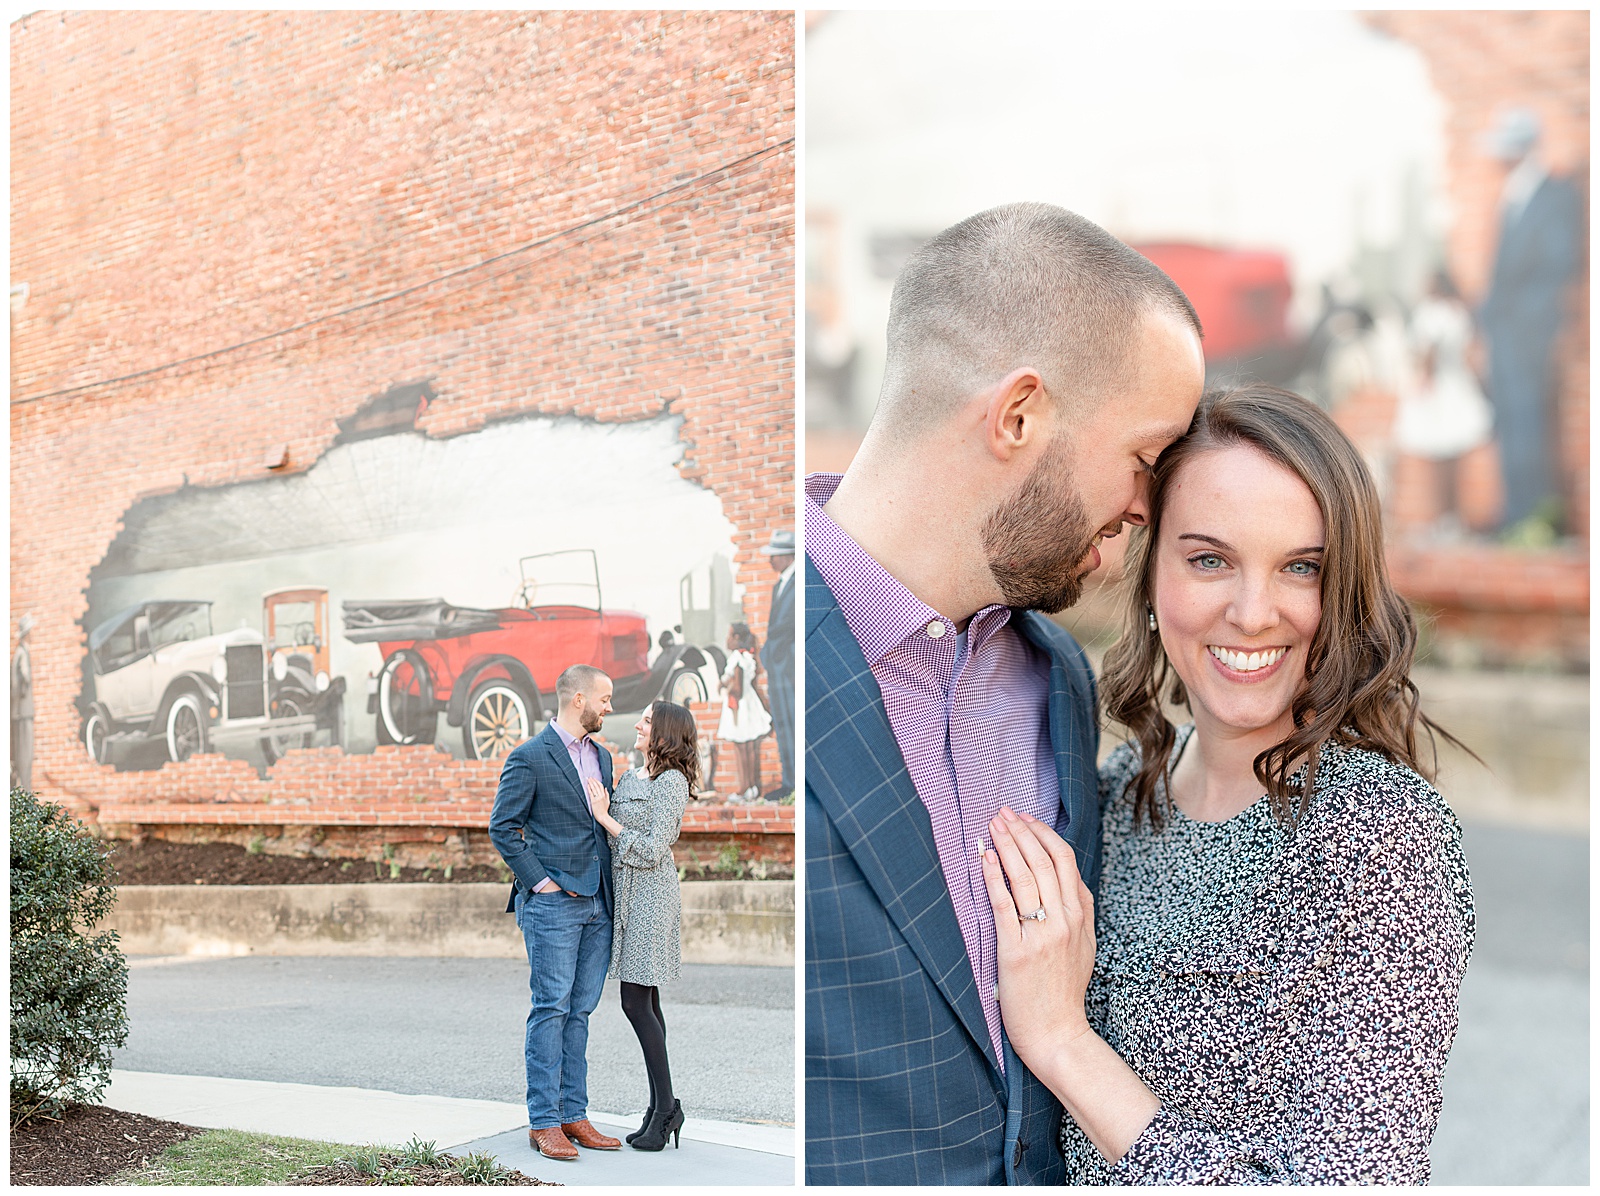 engagement session photos in fron of car mural in Ellicott City, Maryland